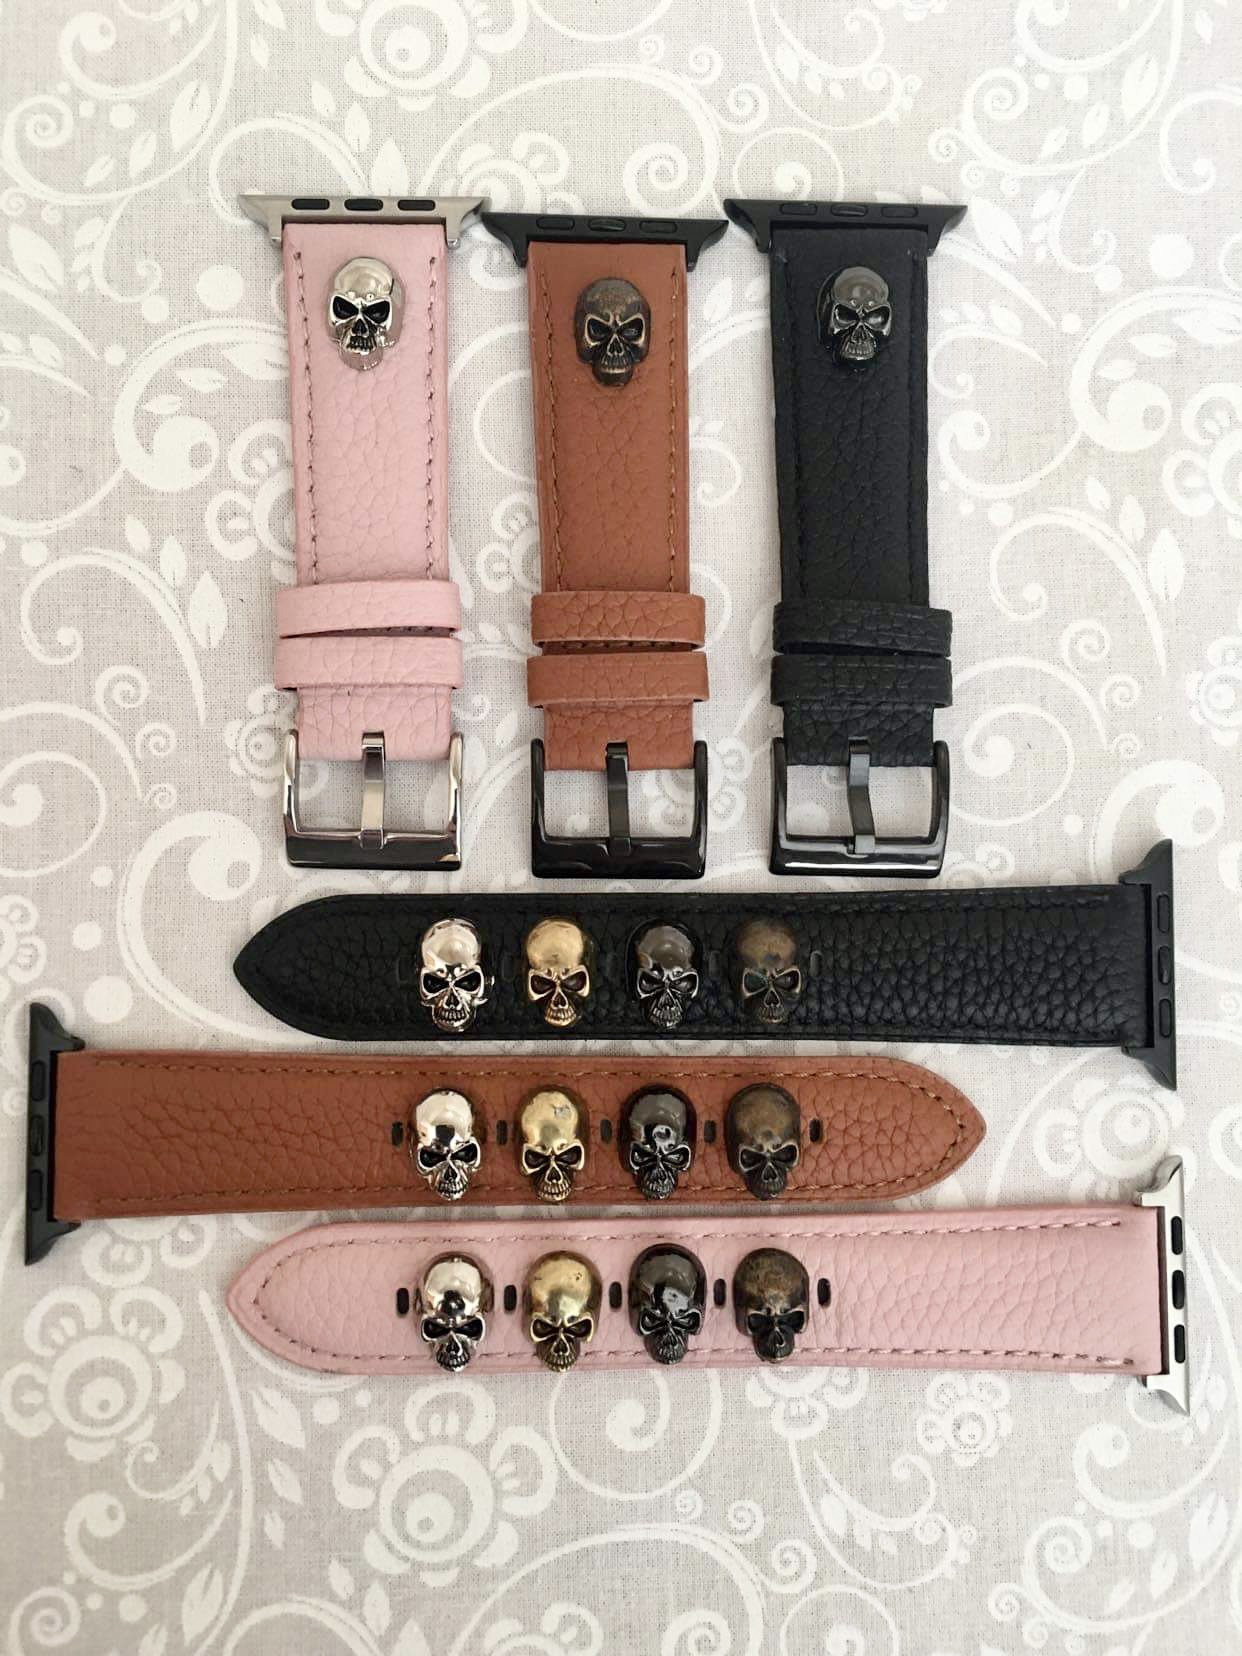  (Gothic Skull Spider Bull Skull Pattern) Patterned Leather  Wristband Strap Compatible with Apple Watch Series 5/4/3/2/1  gen,Replacement for iWatch 42mm / 44mm Bands : Cell Phones & Accessories